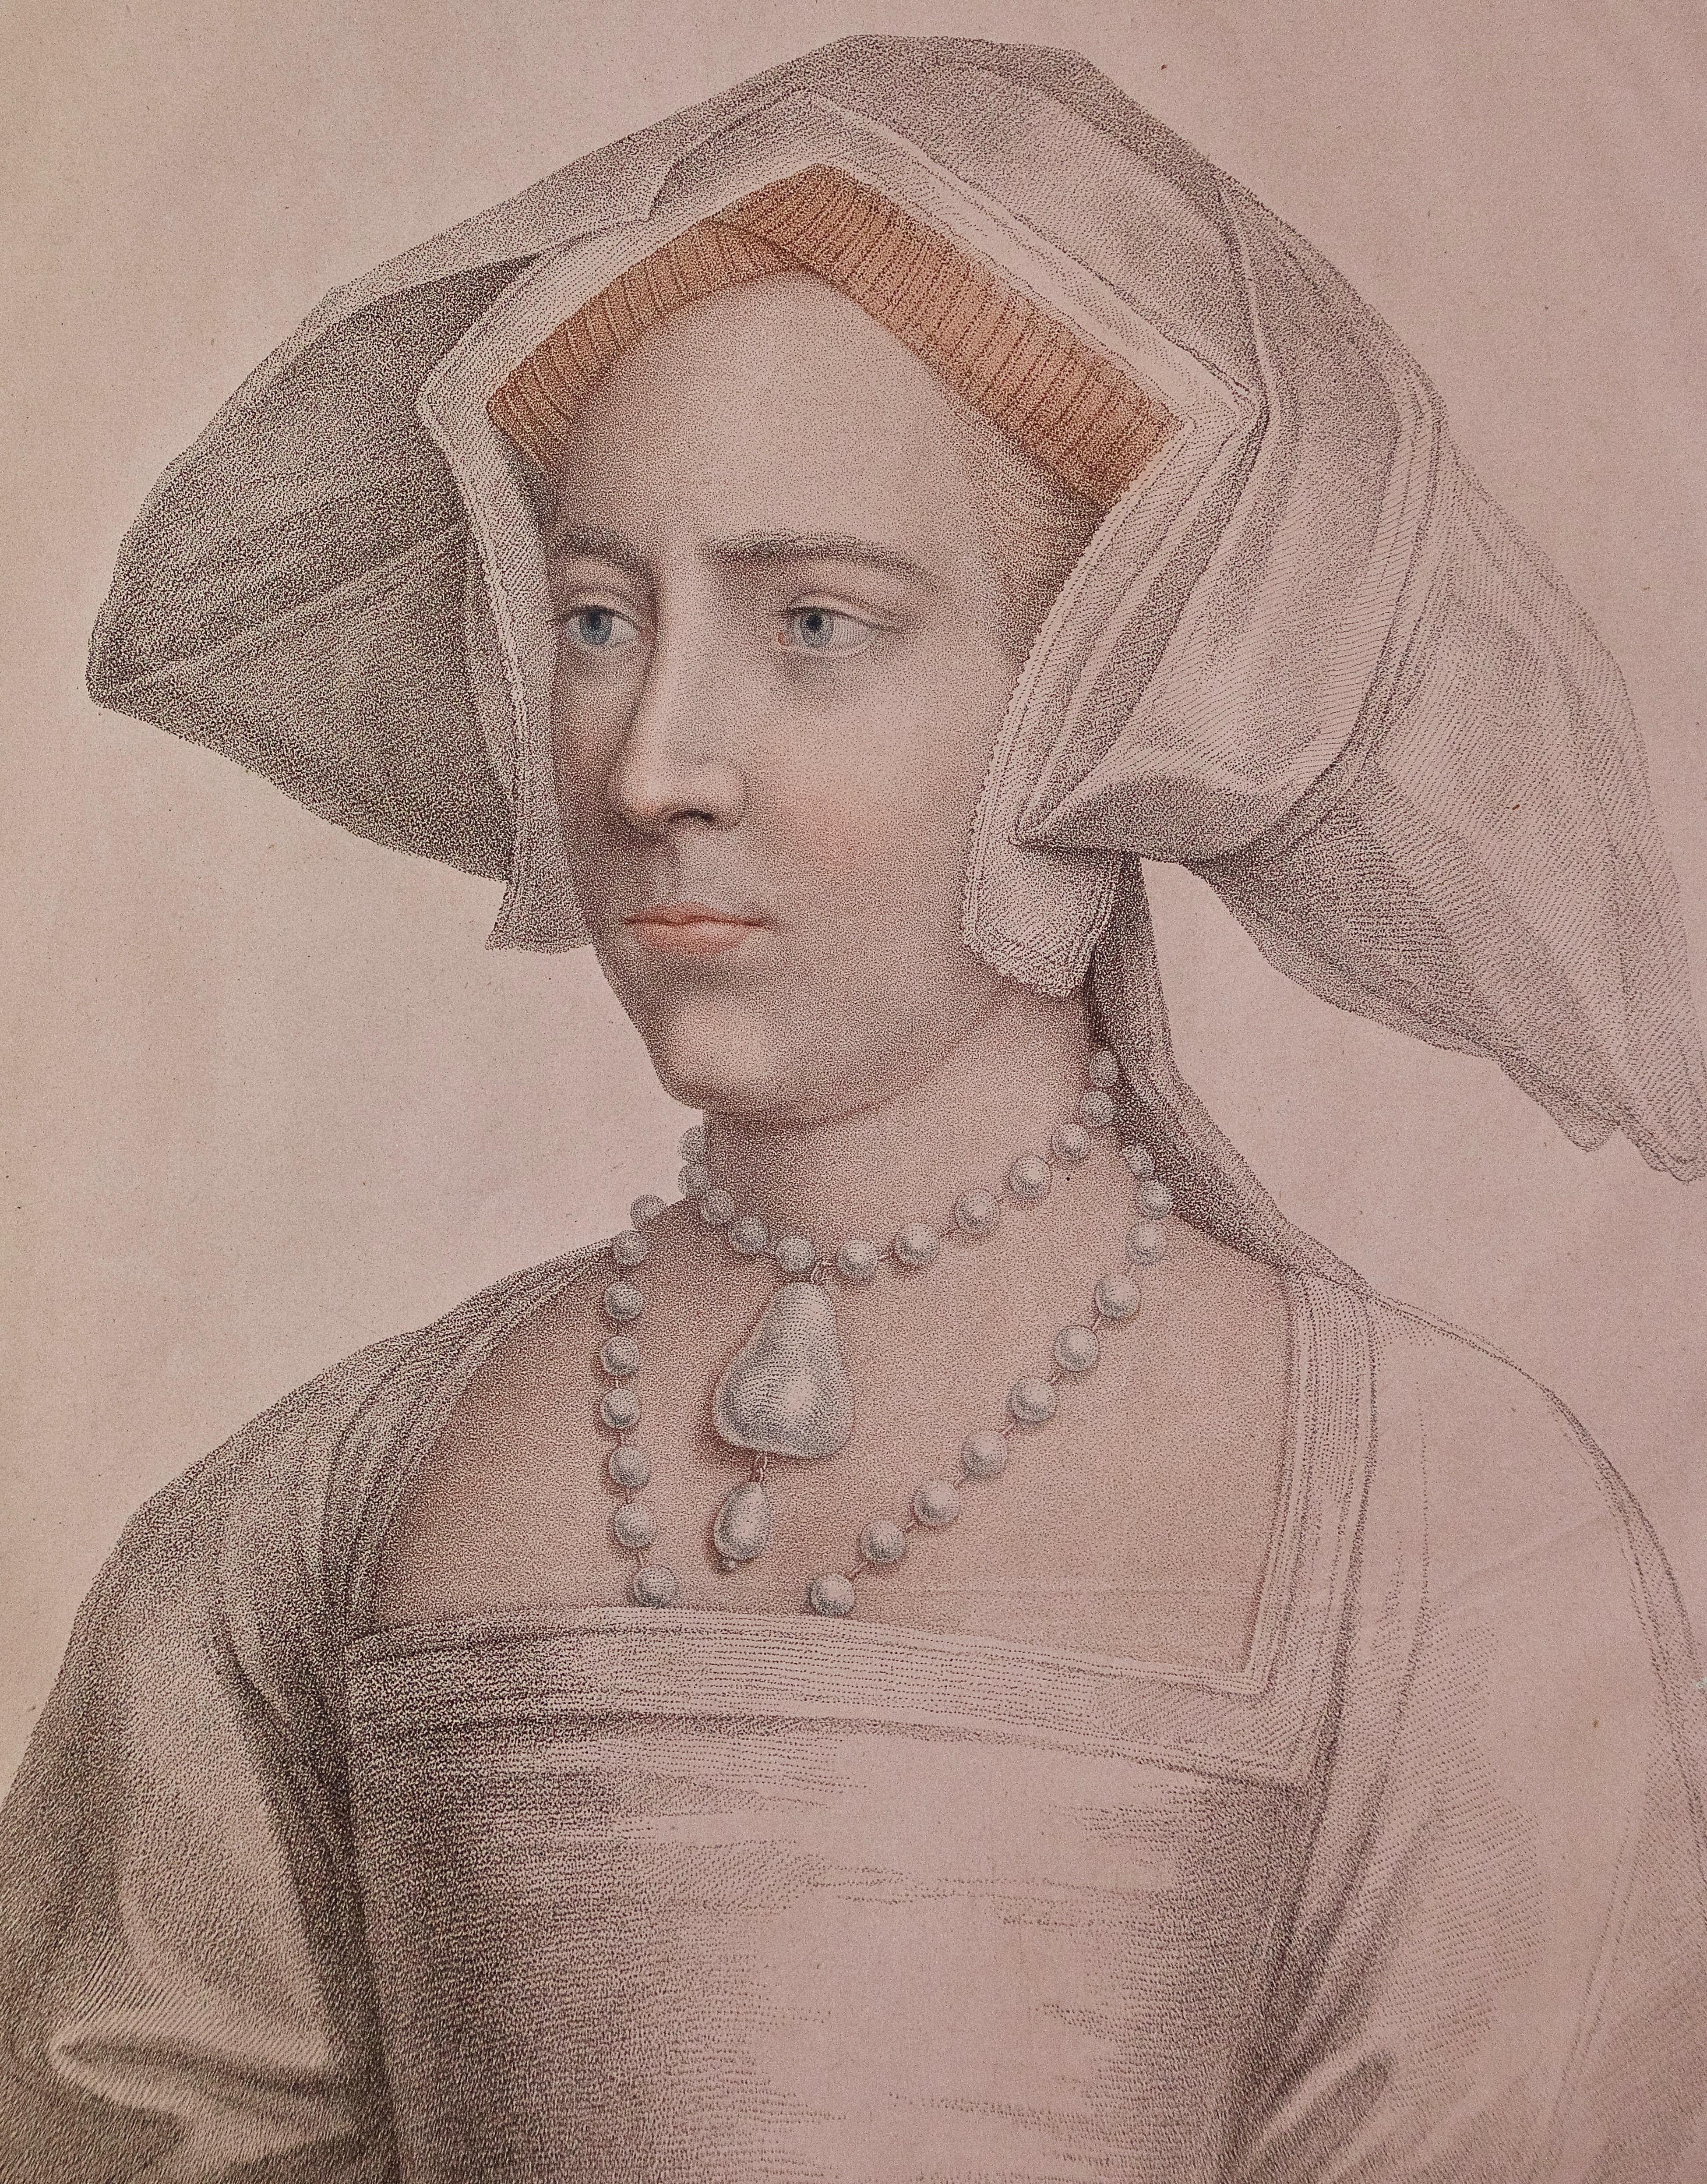 18th C. Bartolozzi Portrait of Queen Mary from a 16th Century Holbein Drawing - Print by Hans Holbein